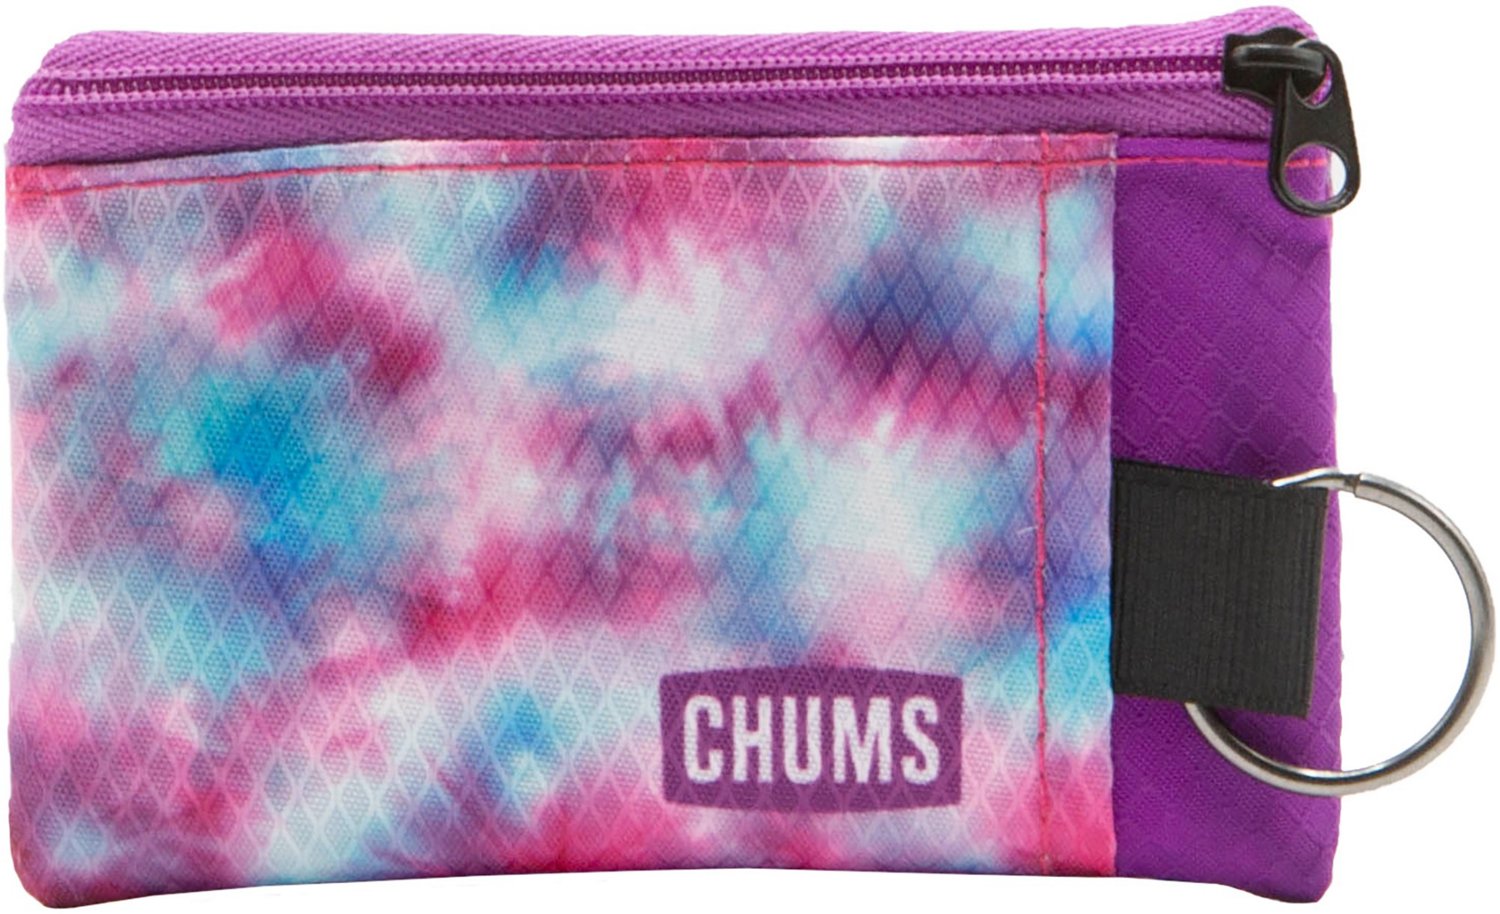 Chums Surfshort Wallet | Academy